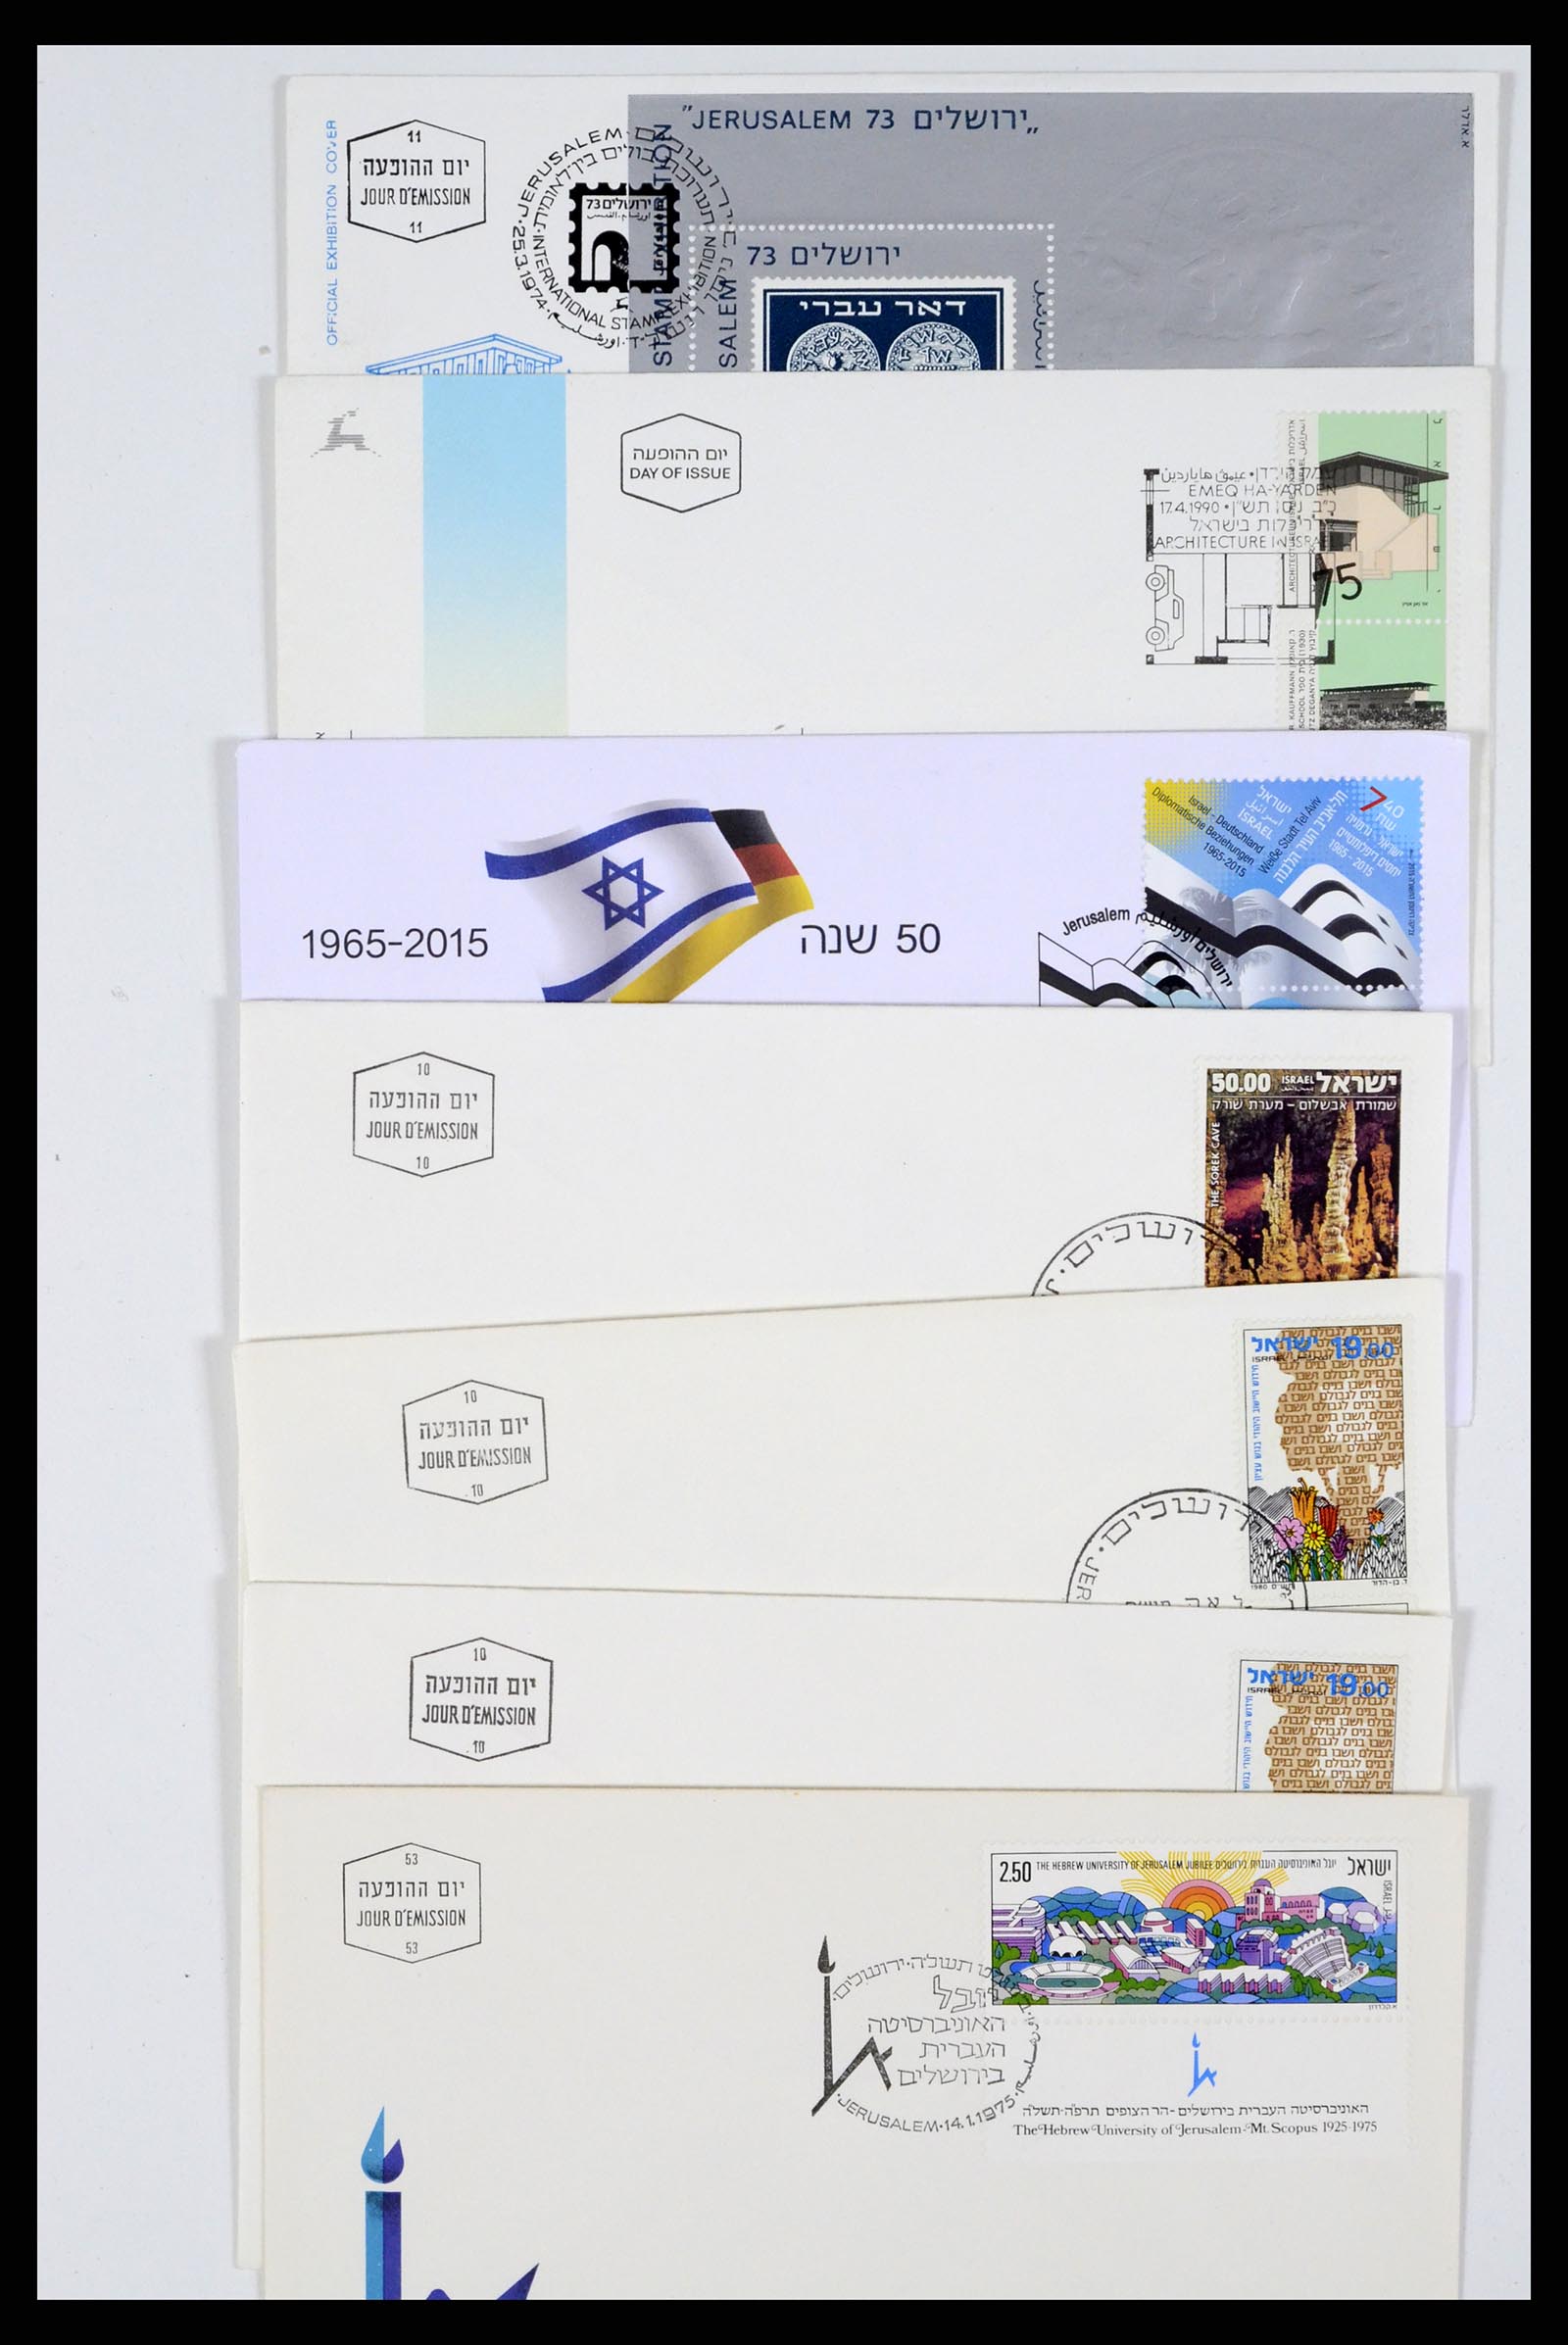 37711 003 - Stamp collection 37711 Israel first day covers 1970-2000.